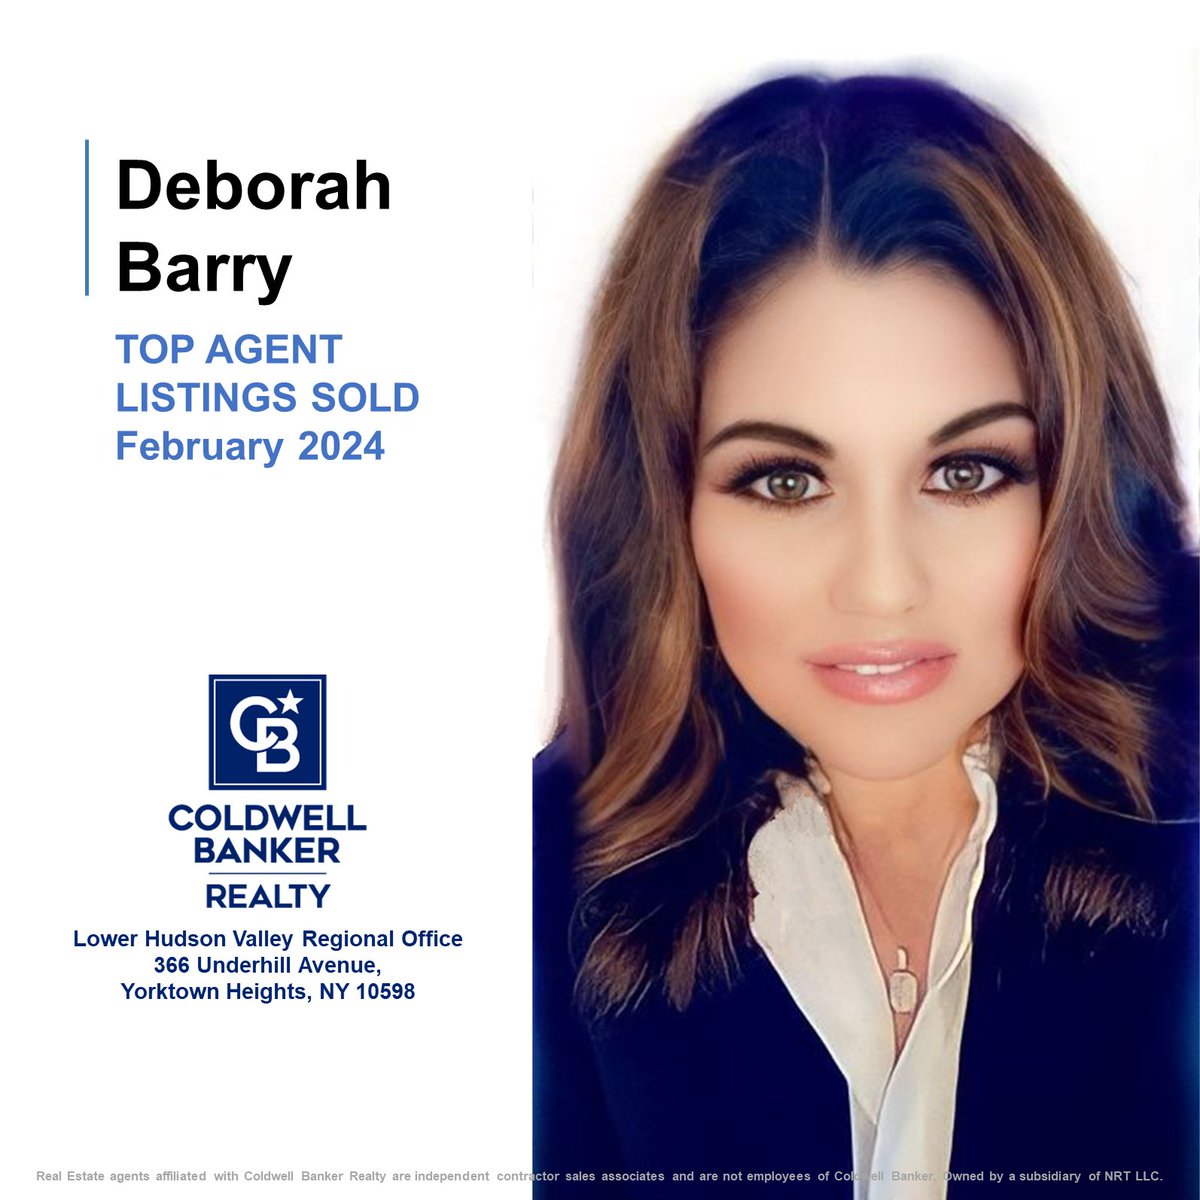 Congratulations to Deborah Barry on being February’s Top Agent Listings Sold.
Your dedication and hard work is greatly appreciated!
#congratulations #cbr #ctwc #realestate #lhvro #cbproud #cbtheplacetobe #bestagent #agentofcoldwellbanker #deborahbarry